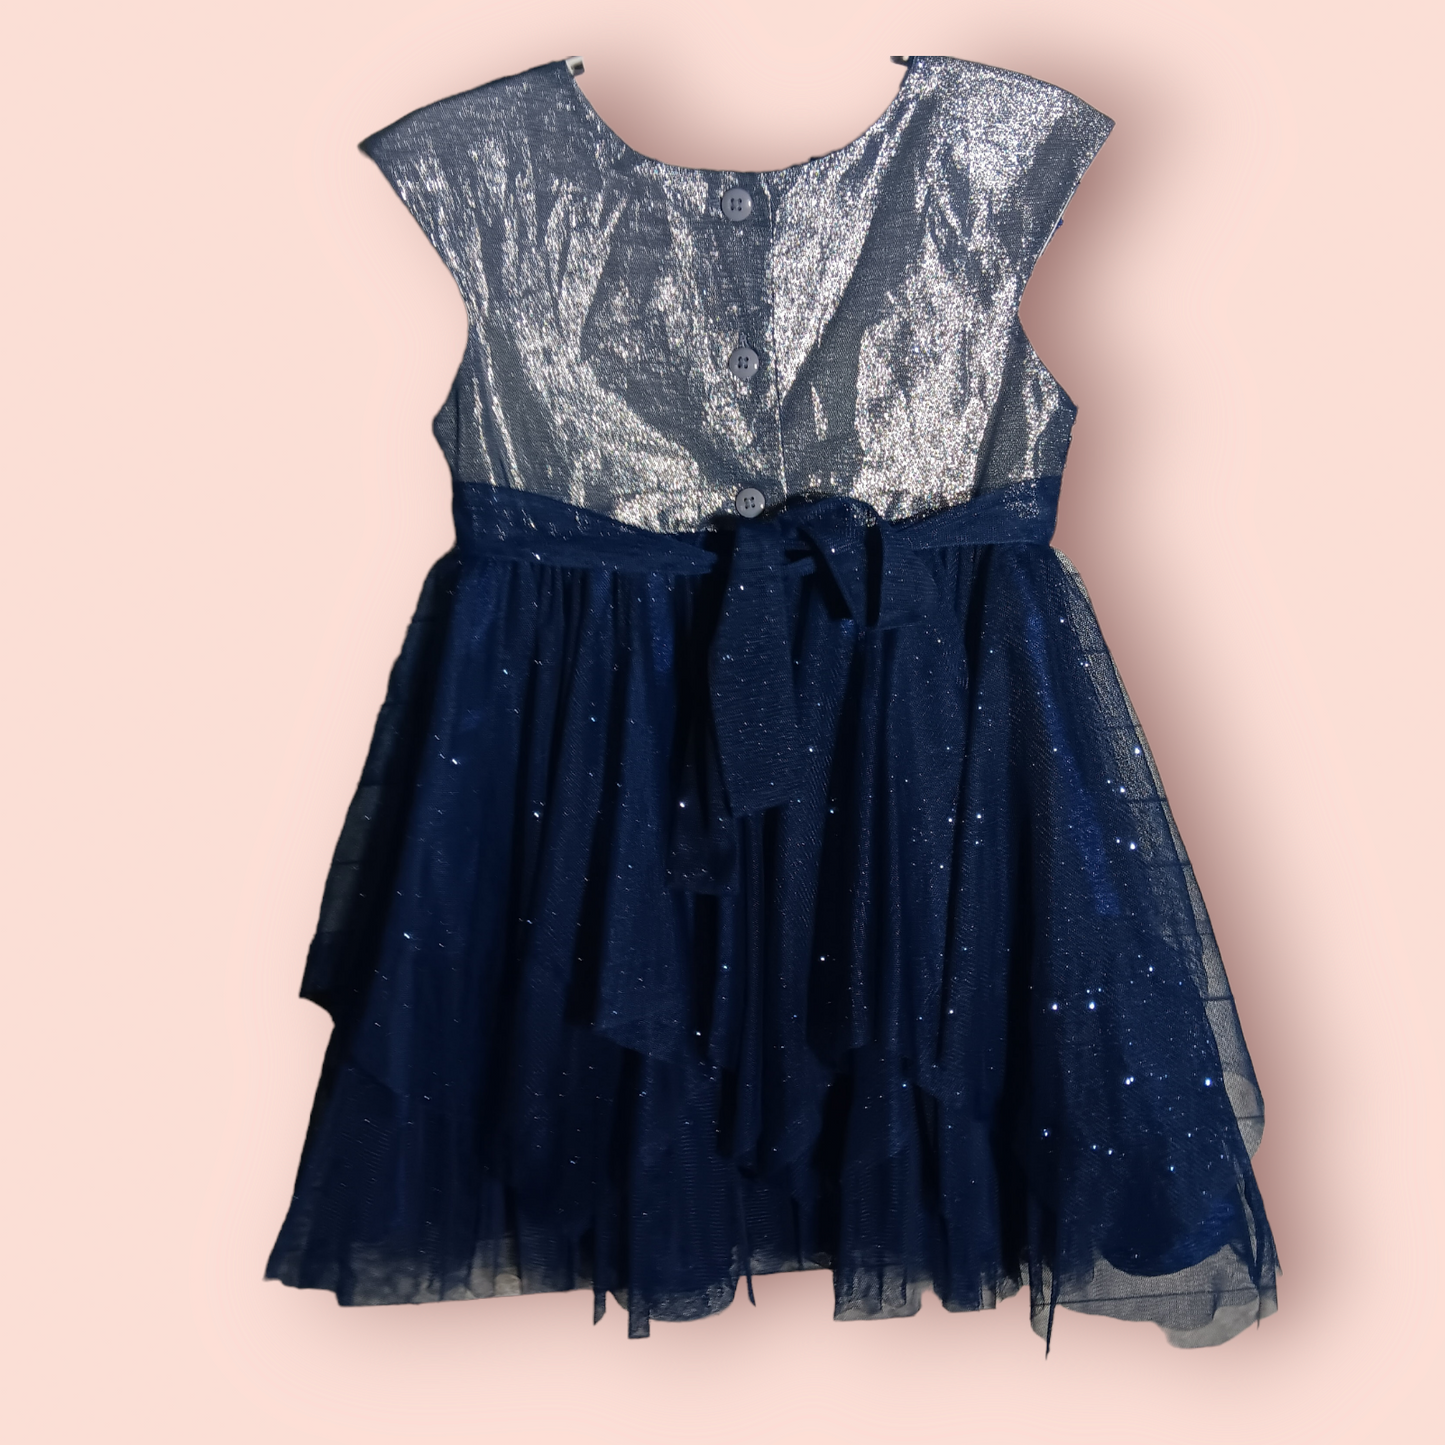 NWT Jona Michelle Dress Toddler Girls 3T Navy Blue Silver Holiday Christmas